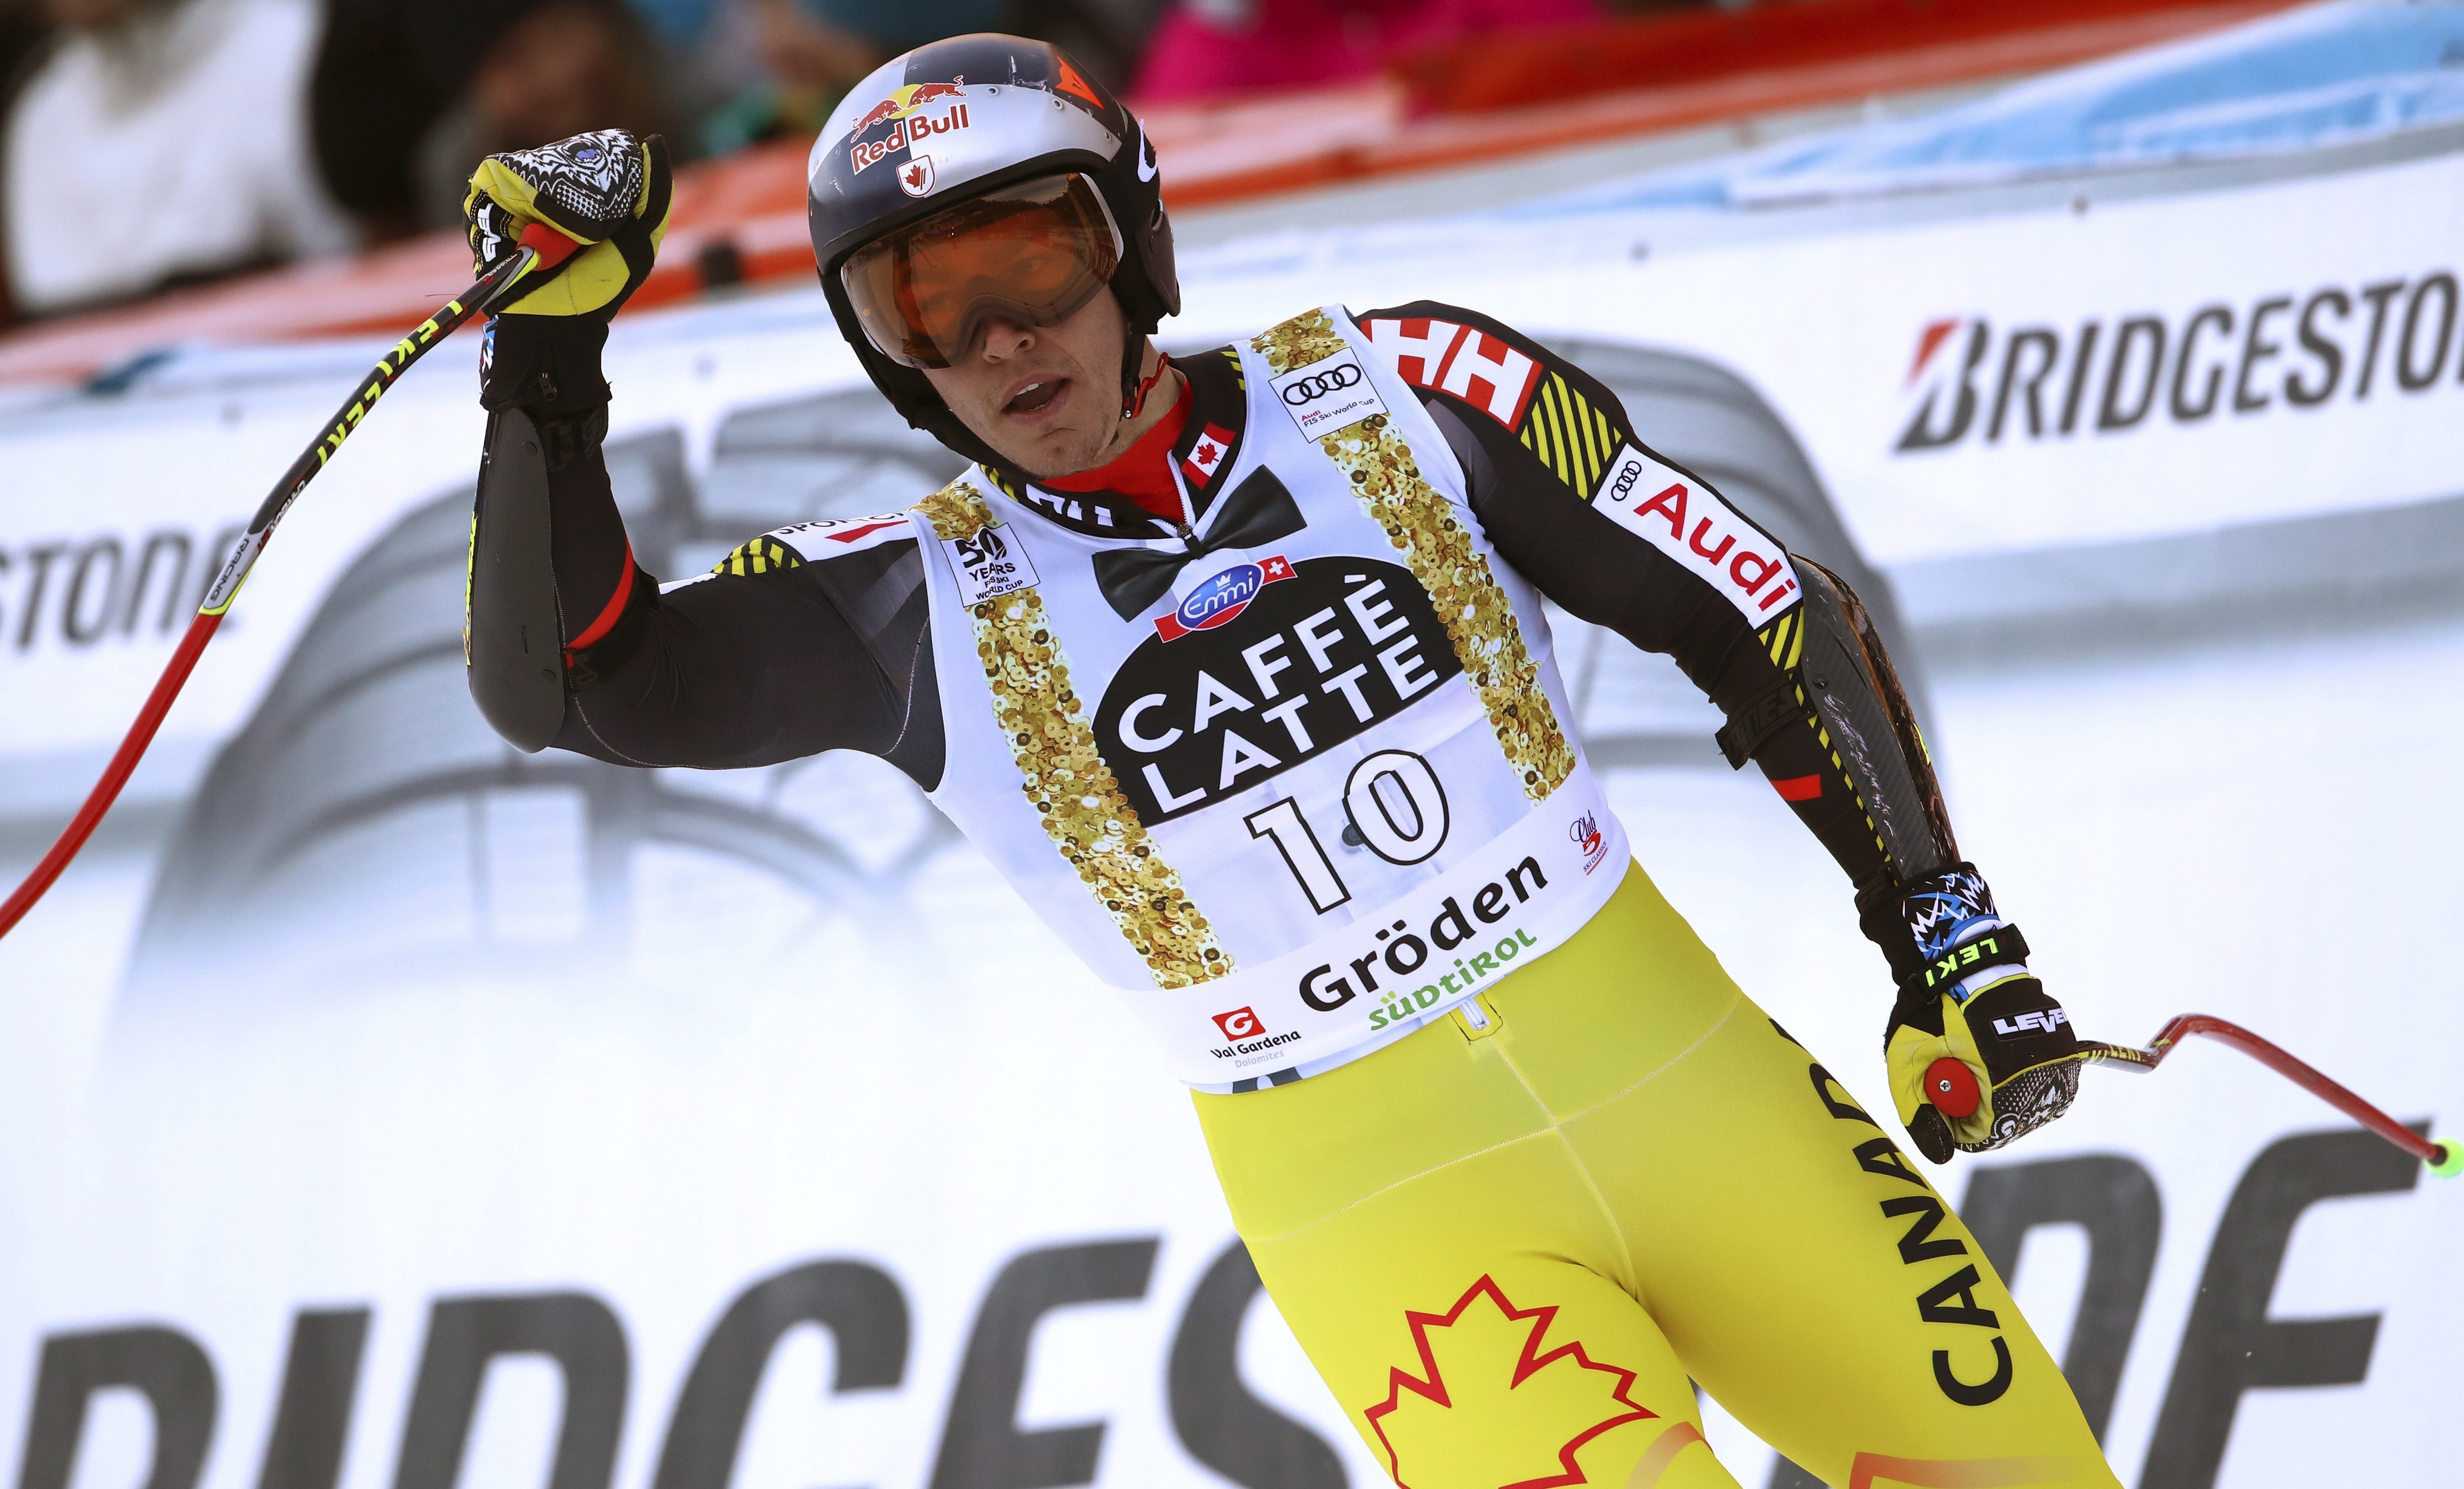 Canada's Erik Guay celebrates after completing an alpine ski, men's World Cup super-G, in Val Gardena, Italy, Friday, Dec. 16, 2016. (AP Photo/Alessandro Trovati)